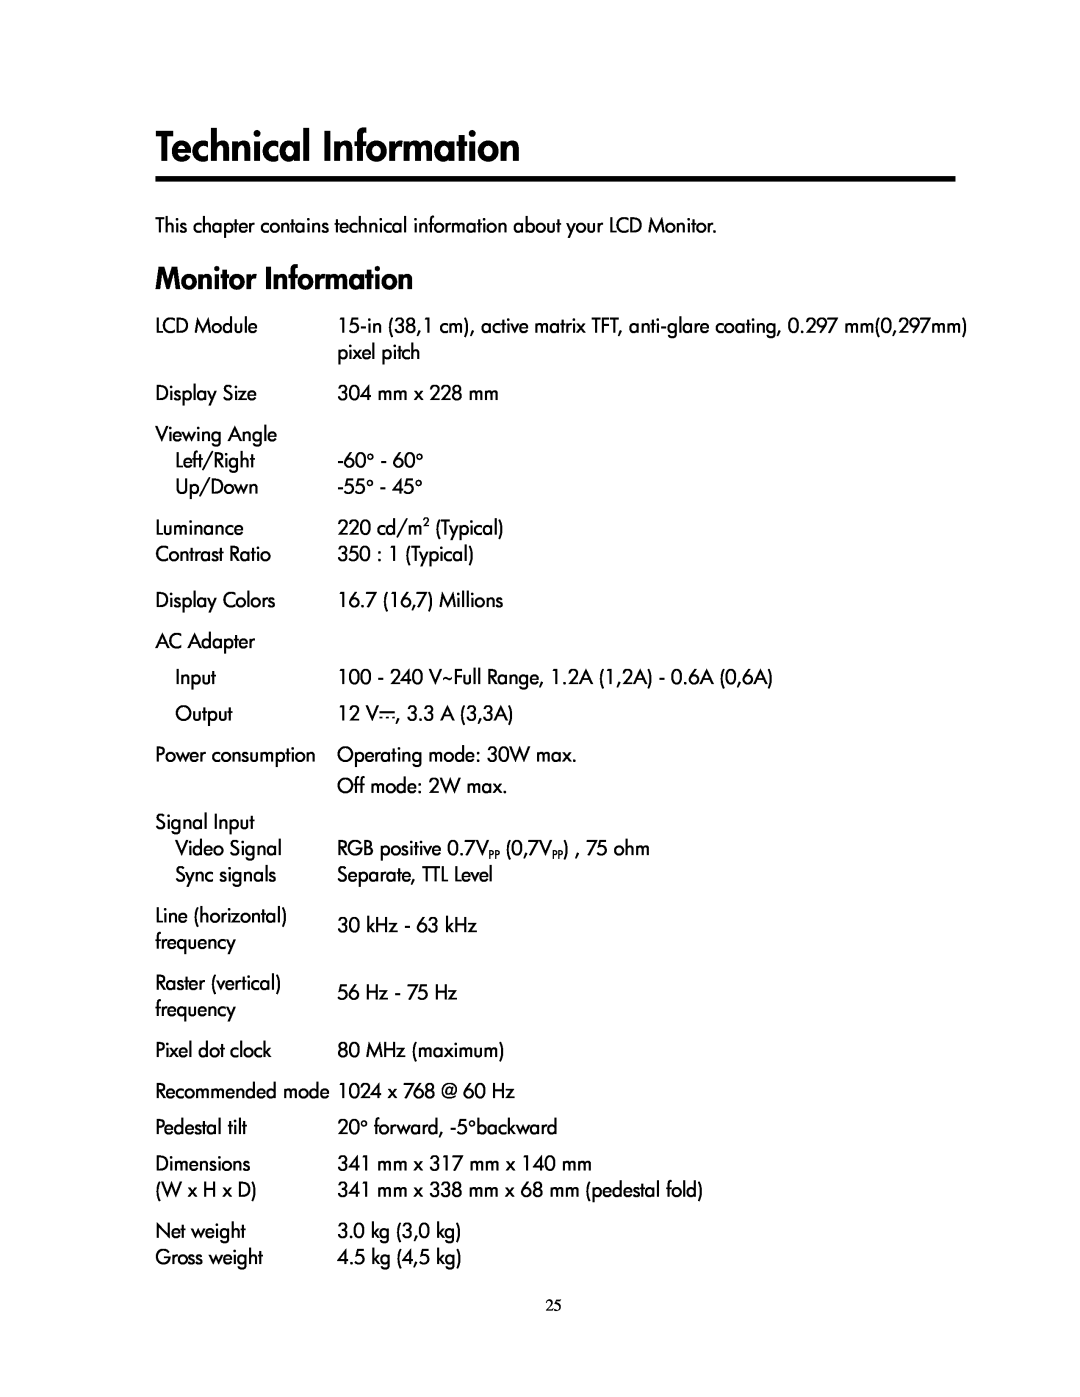 Compaq 1501 manual Technical Information, Monitor Information 